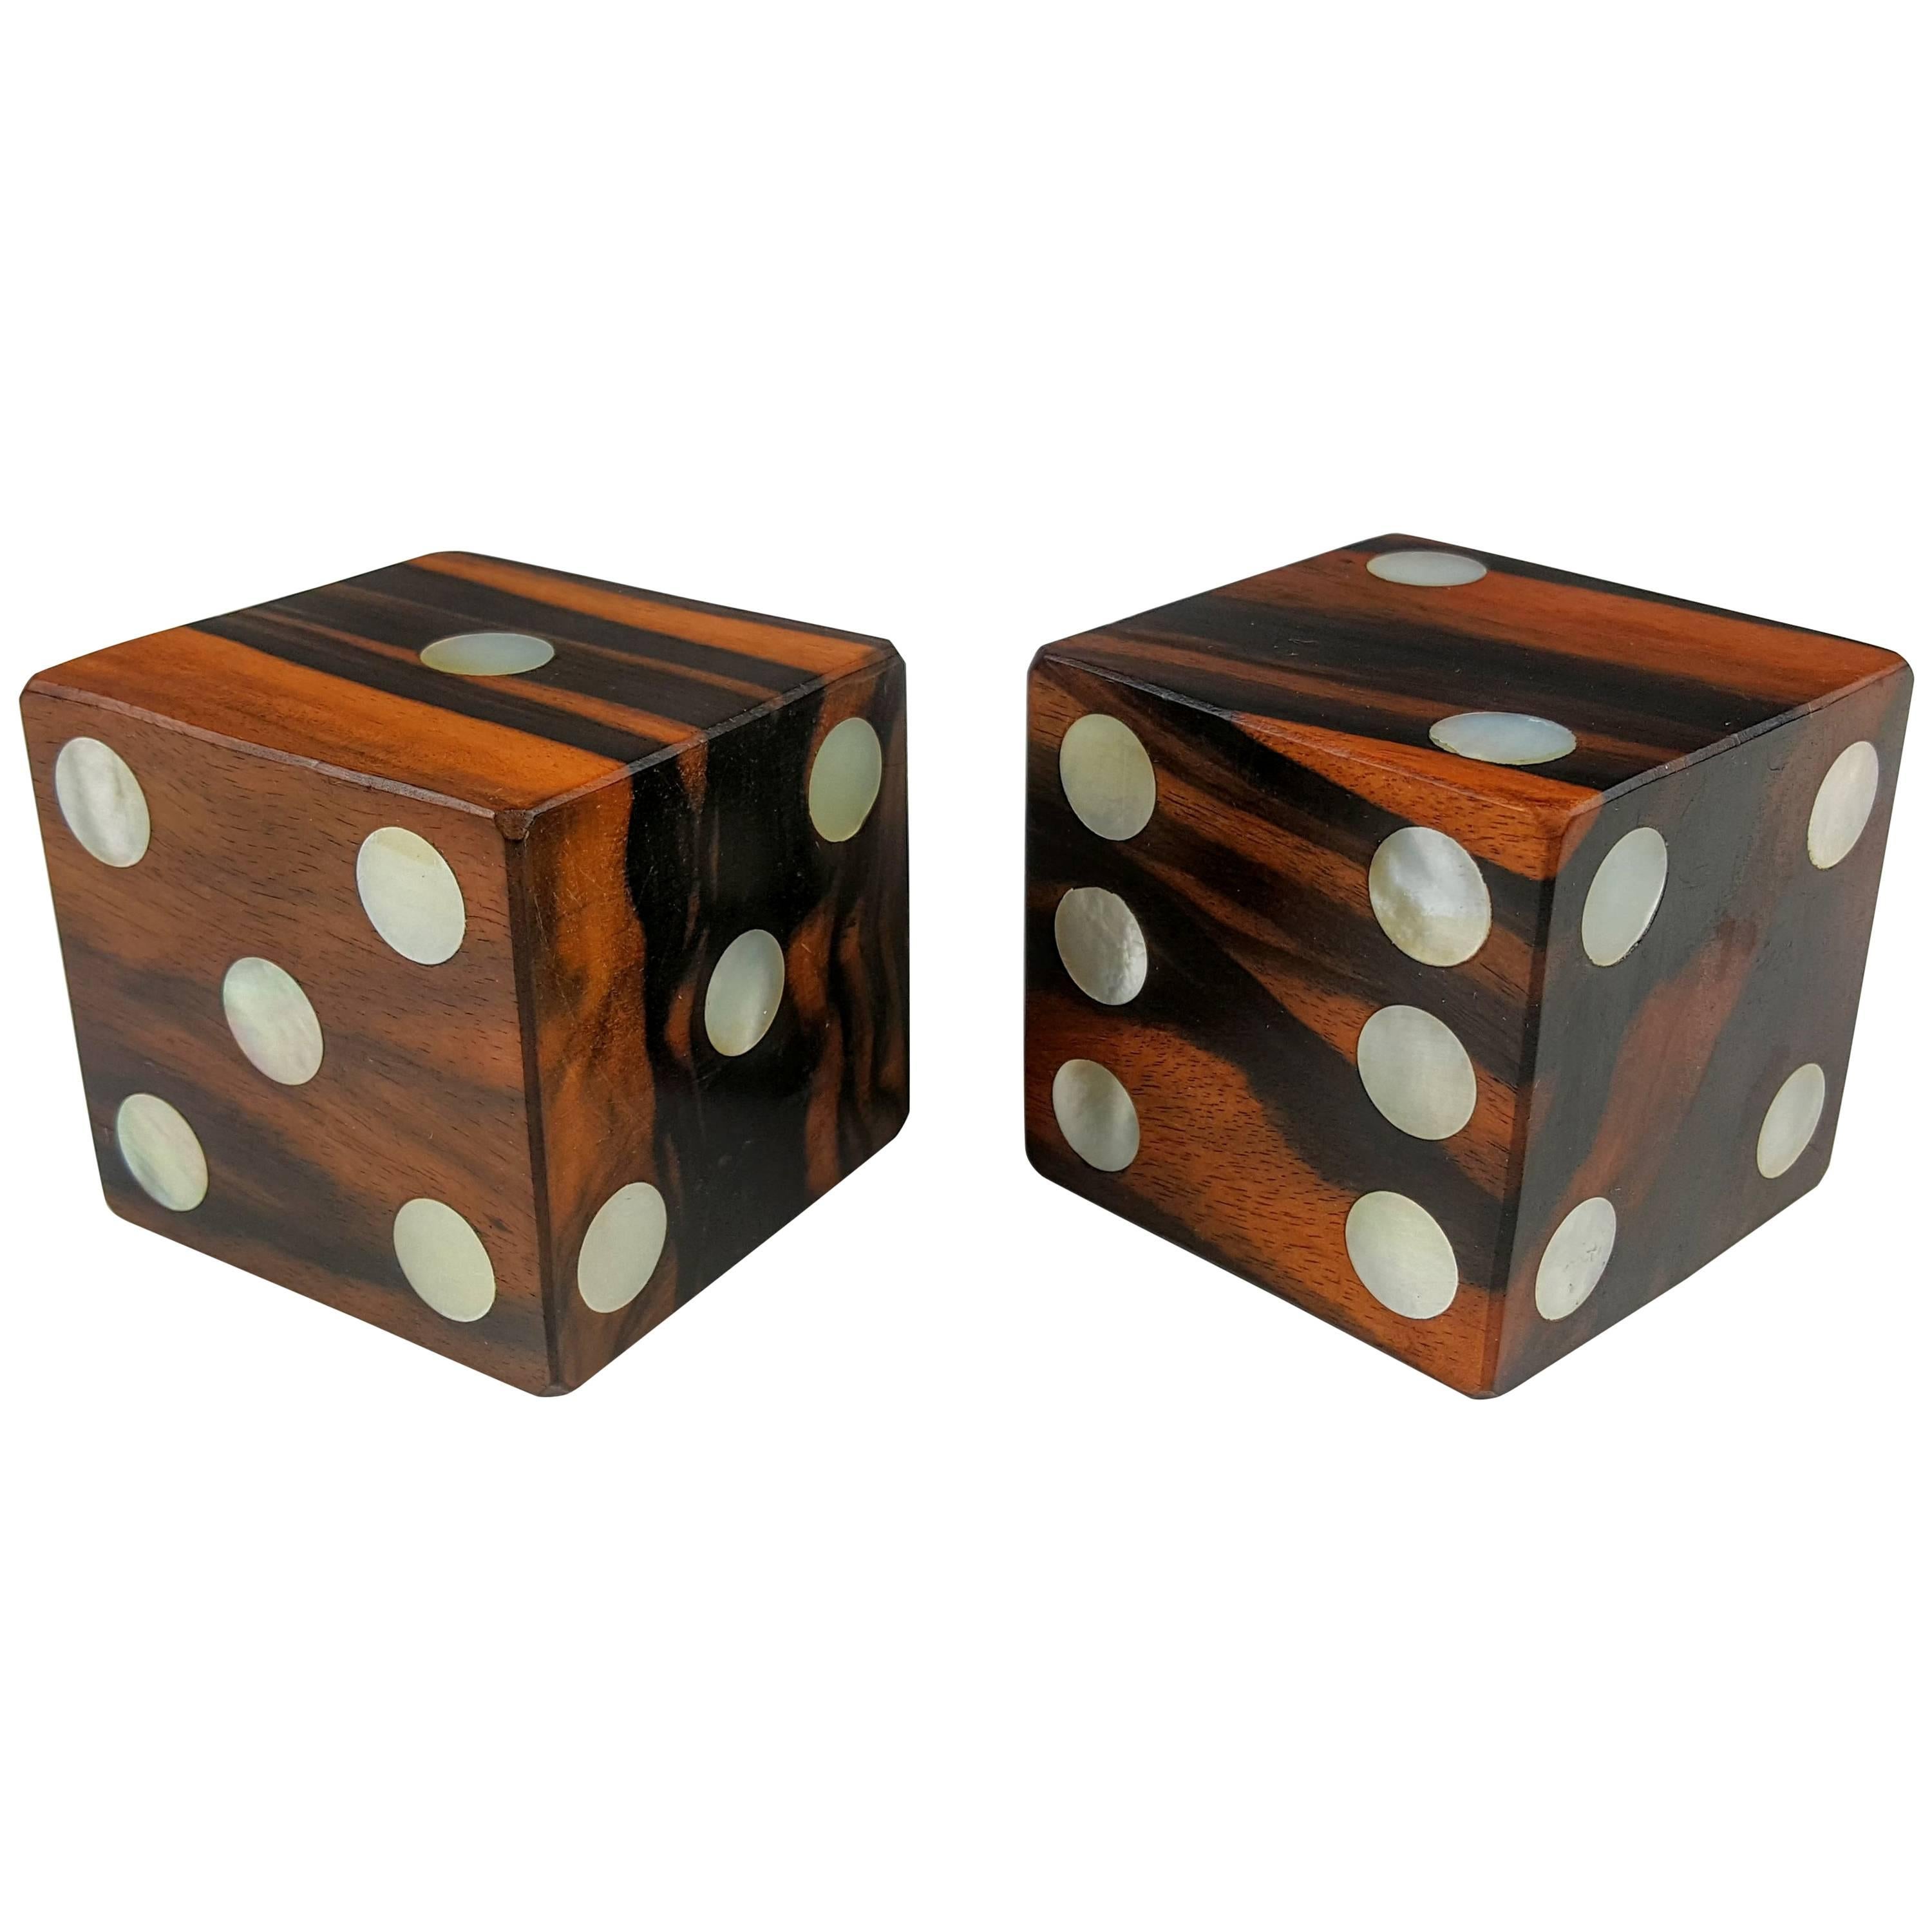 Very Large Solid Exotic Wood Dice with Inlaid Mother-of-Pearl